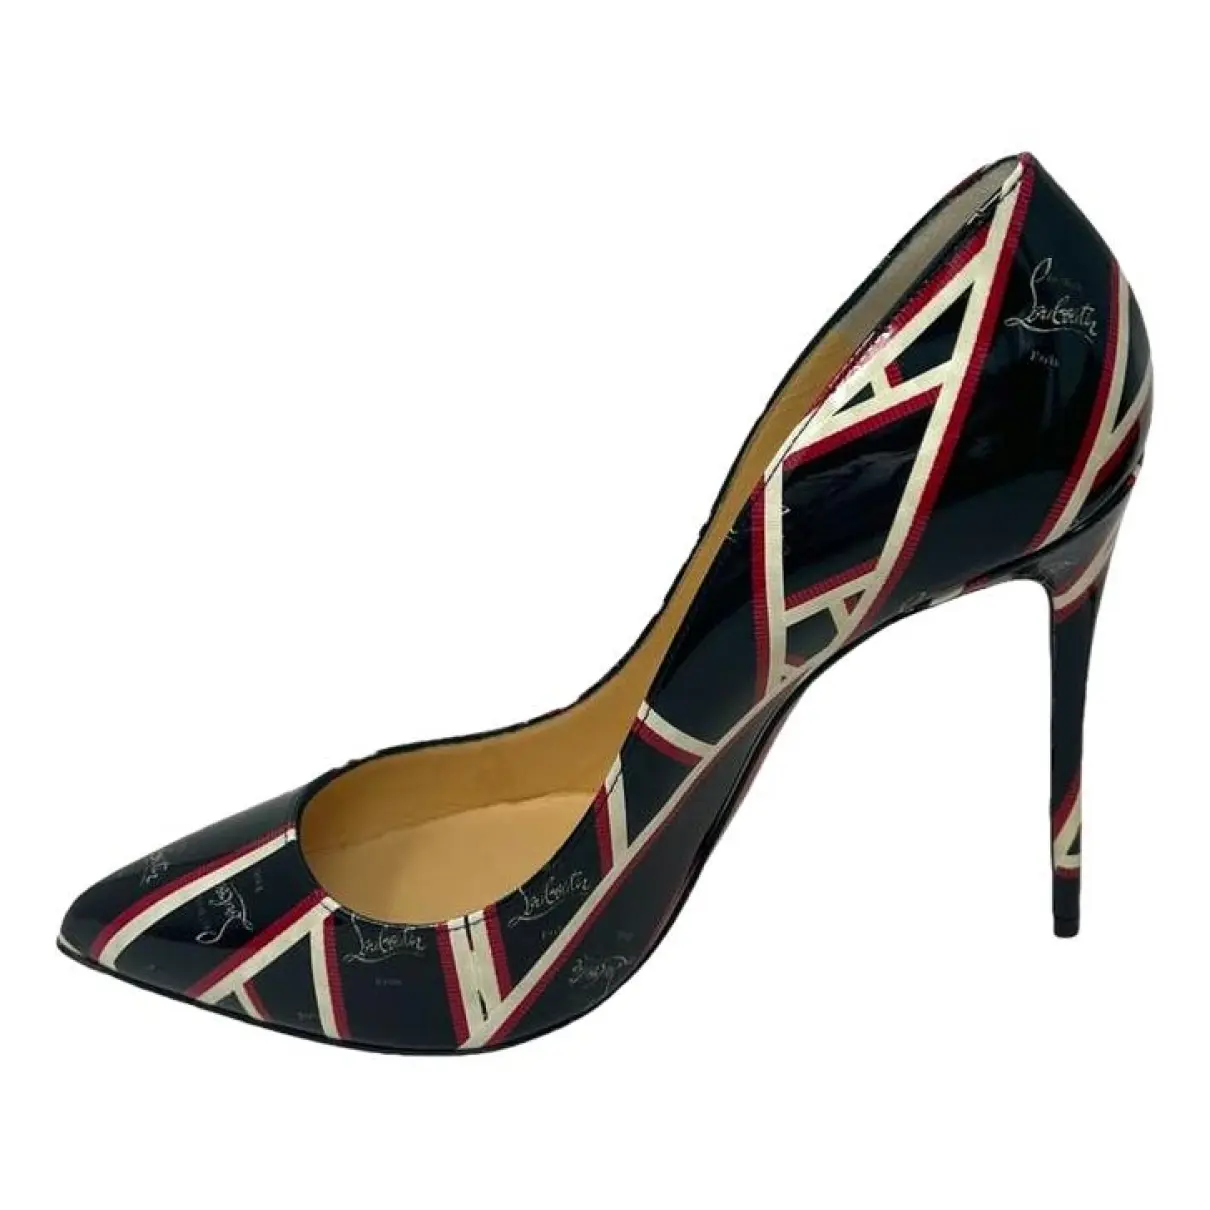 Pigalle patent leather heels